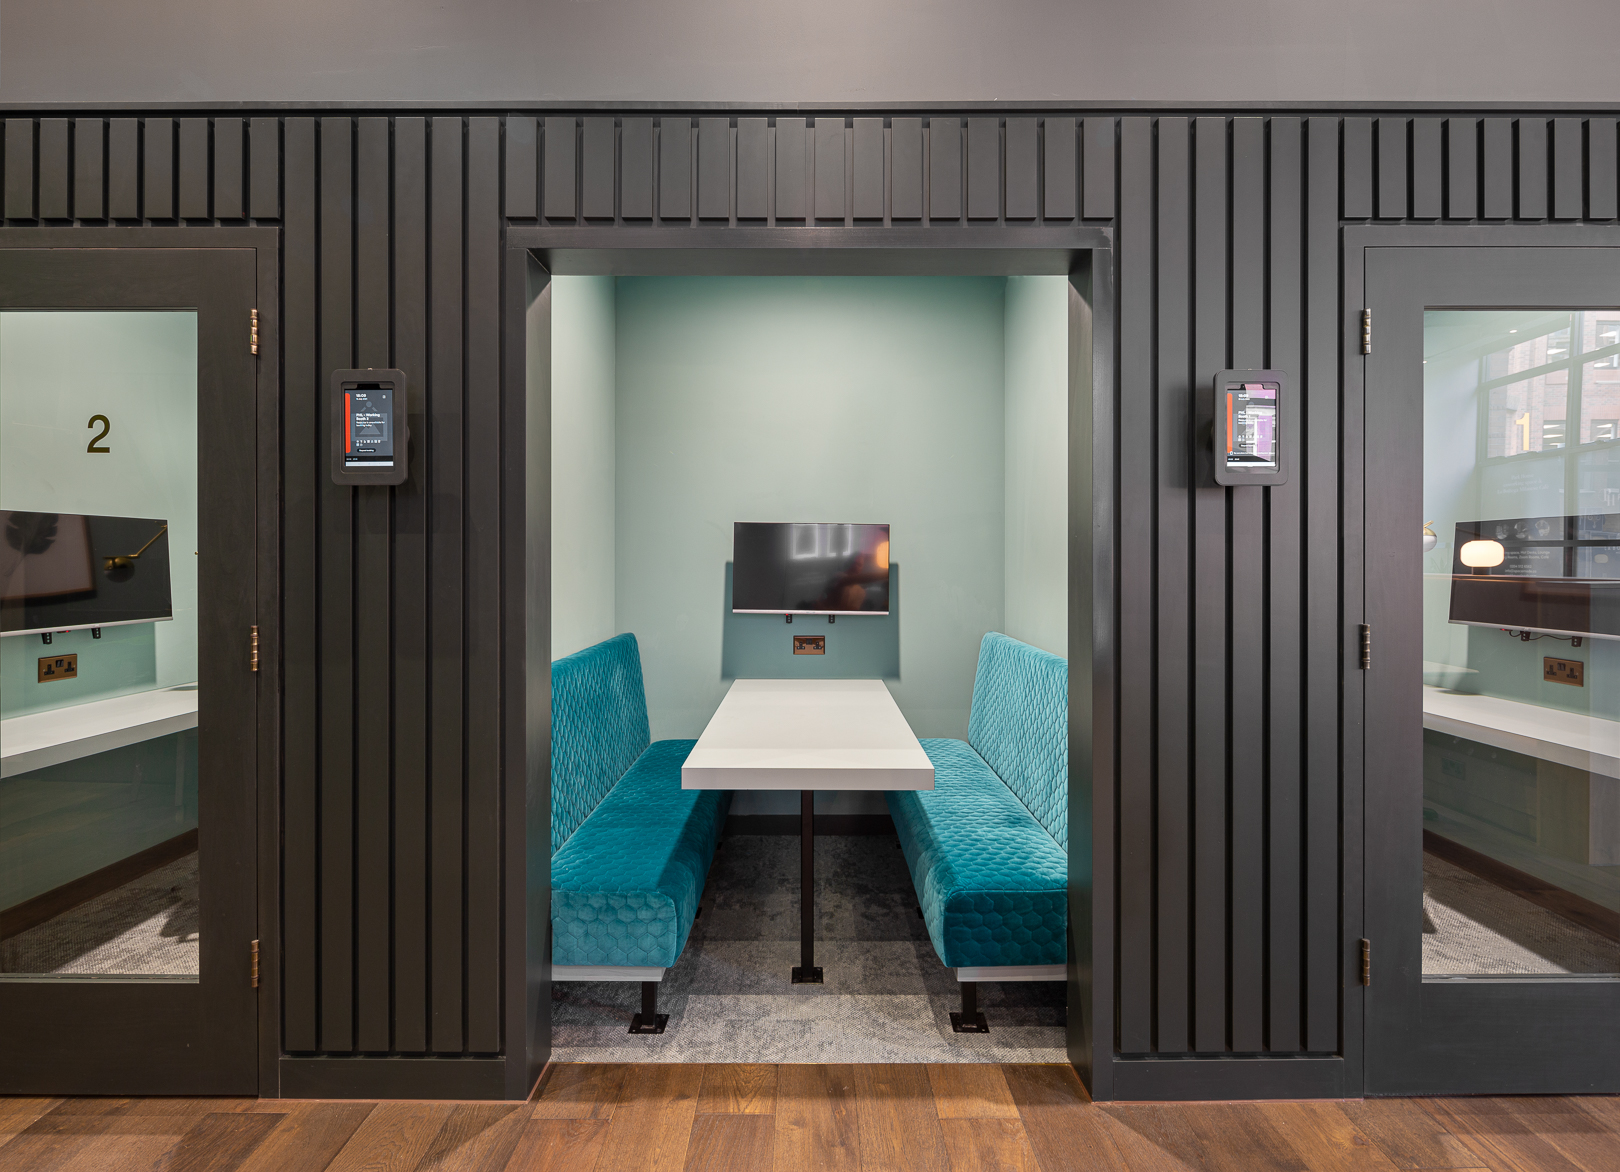 Meeting Booth at Park House, Leeds